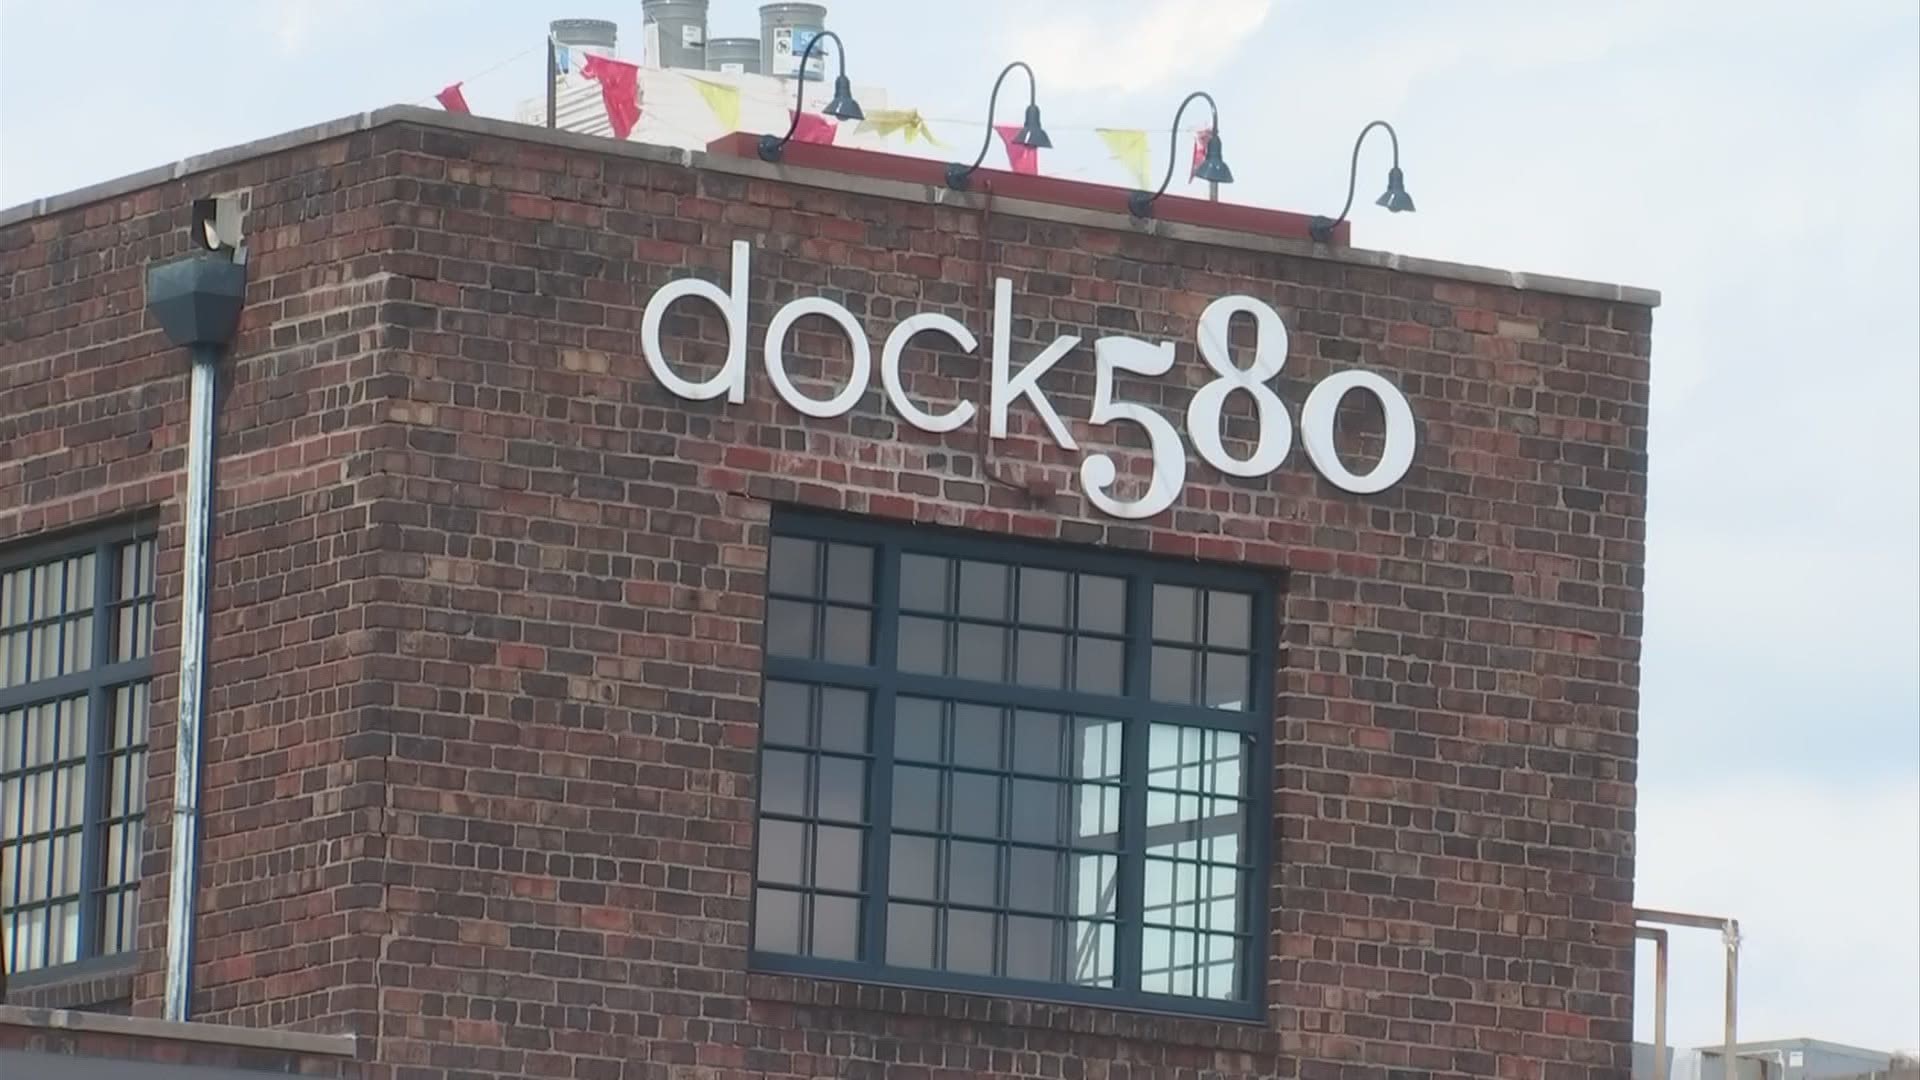 Dock 580 and its rooftop lounge Juniper near downtown Columbus announced they would be closing due to the financial impact of COVID-19.